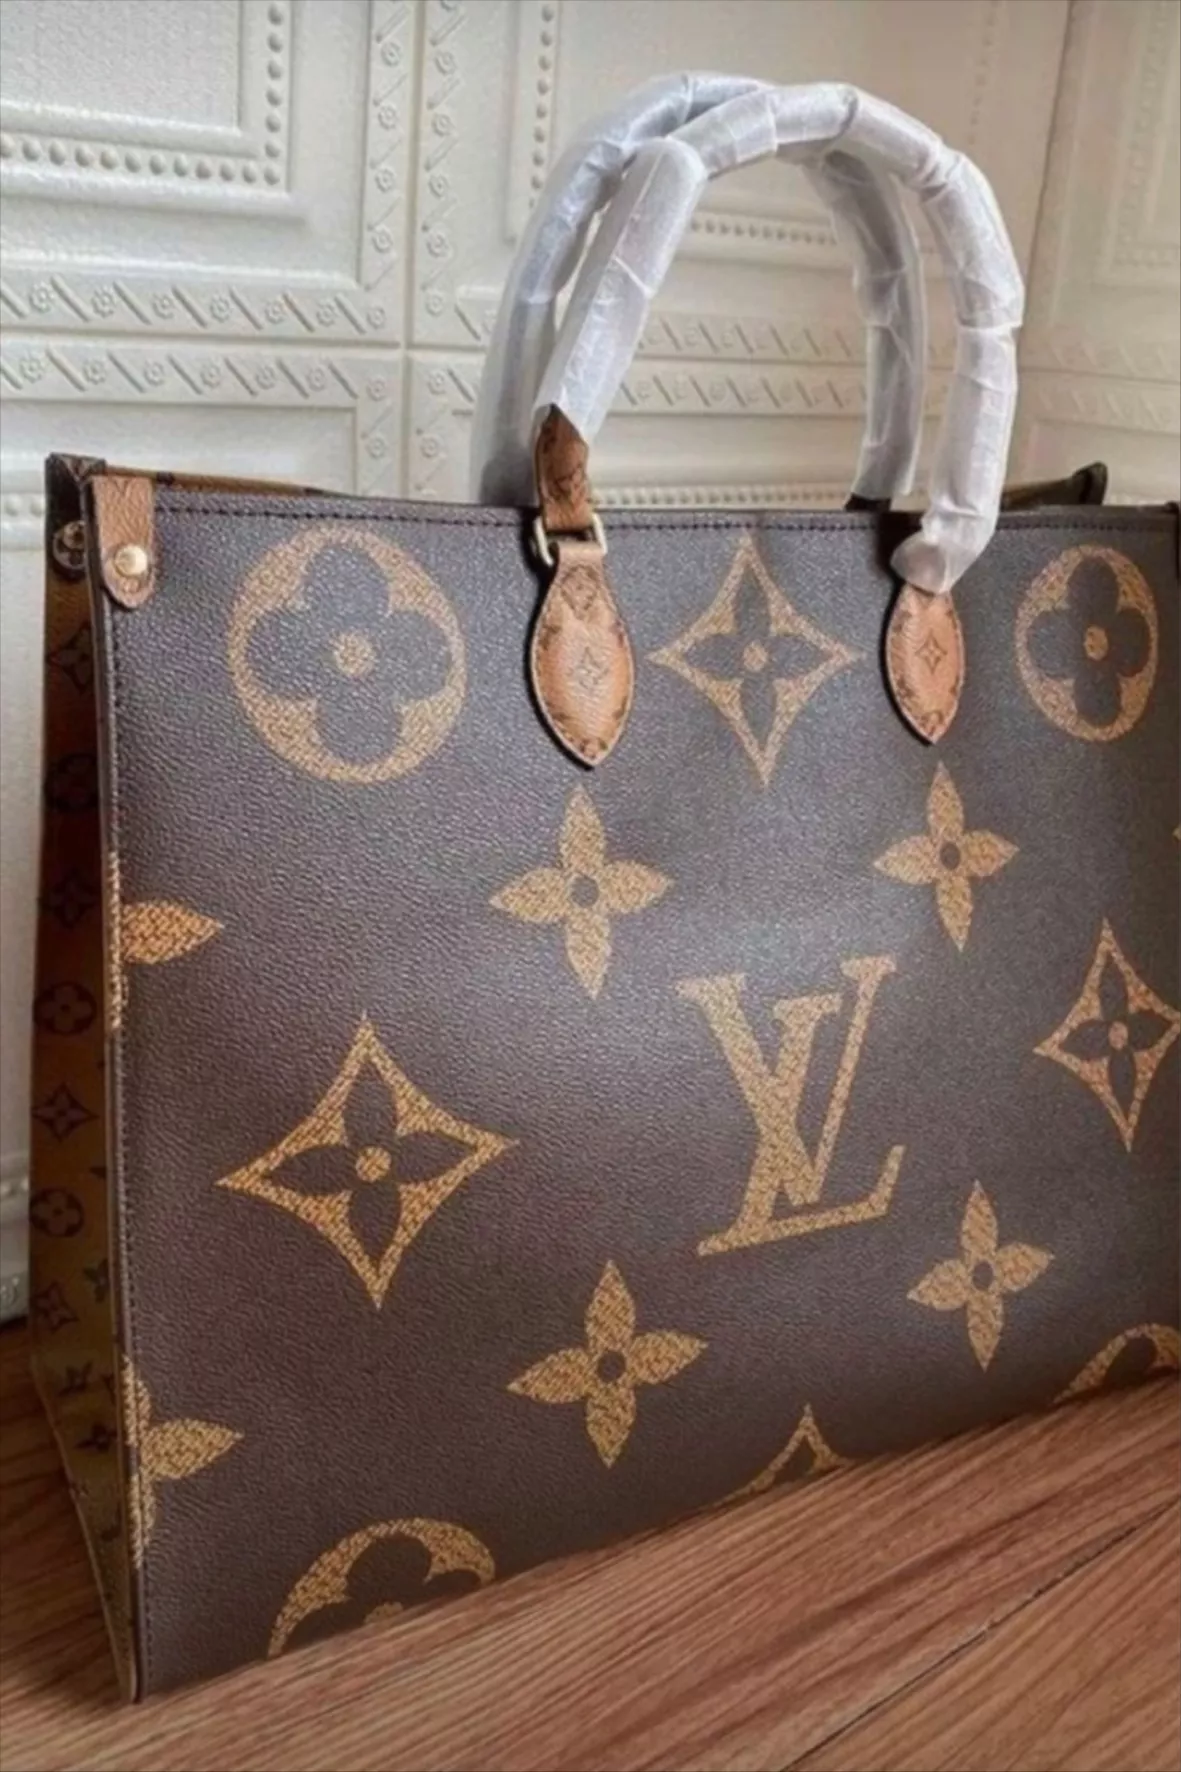 Lv Onthego - Top-handle Bags - Shop The Latest Lv Onthego - AliExpress